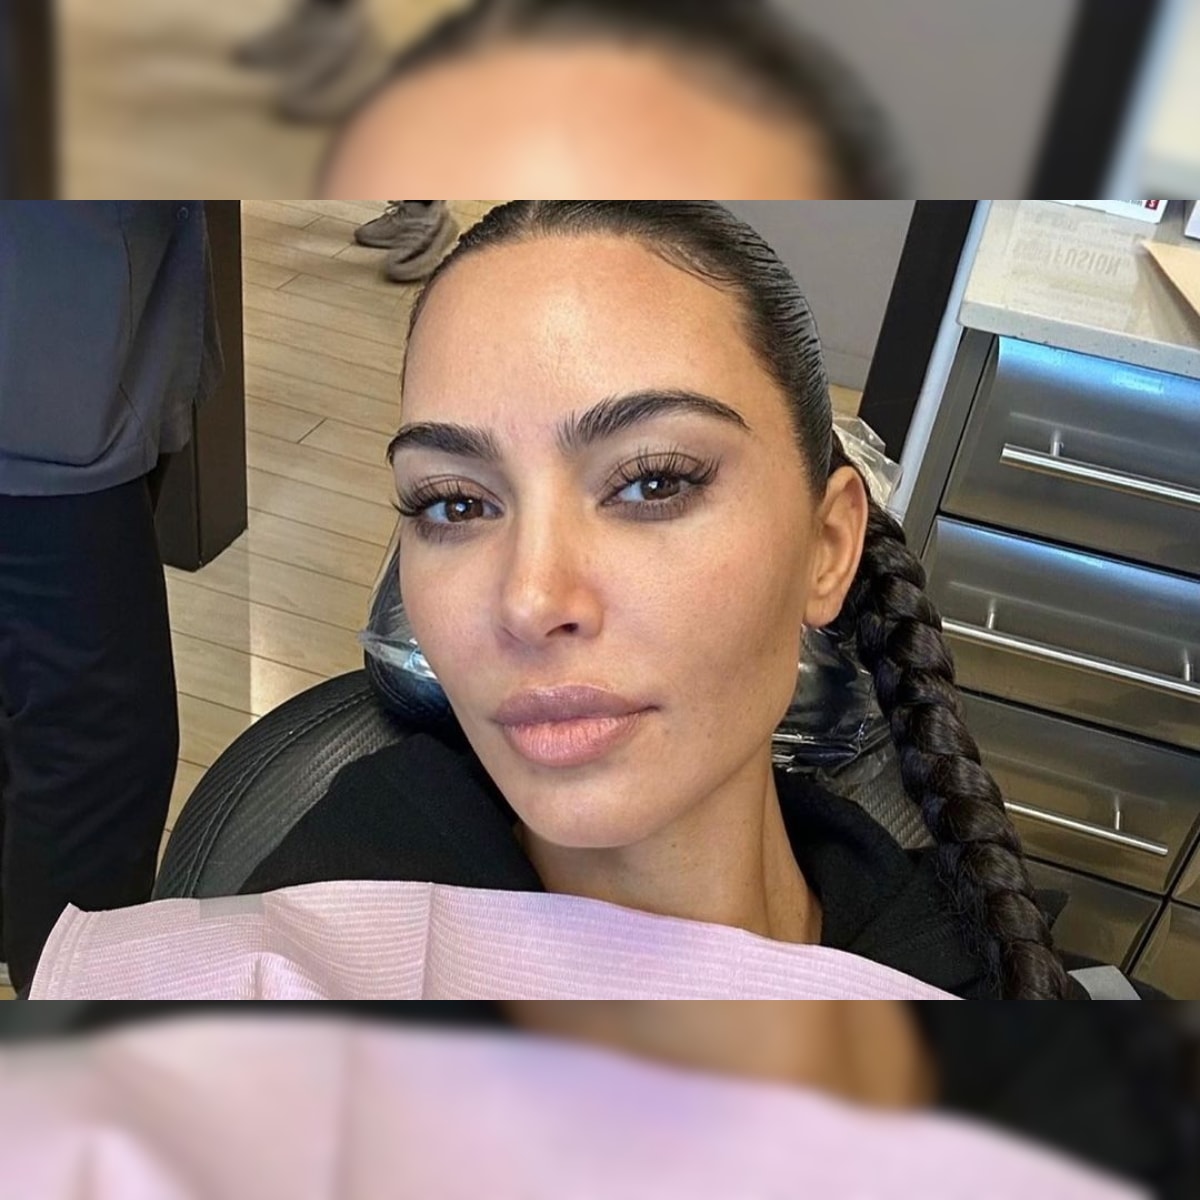 Kim Kardashian Unveils Stunning 'Unfiltered' Look In New Instagram Pic,  Fans Say 'So Beautiful'